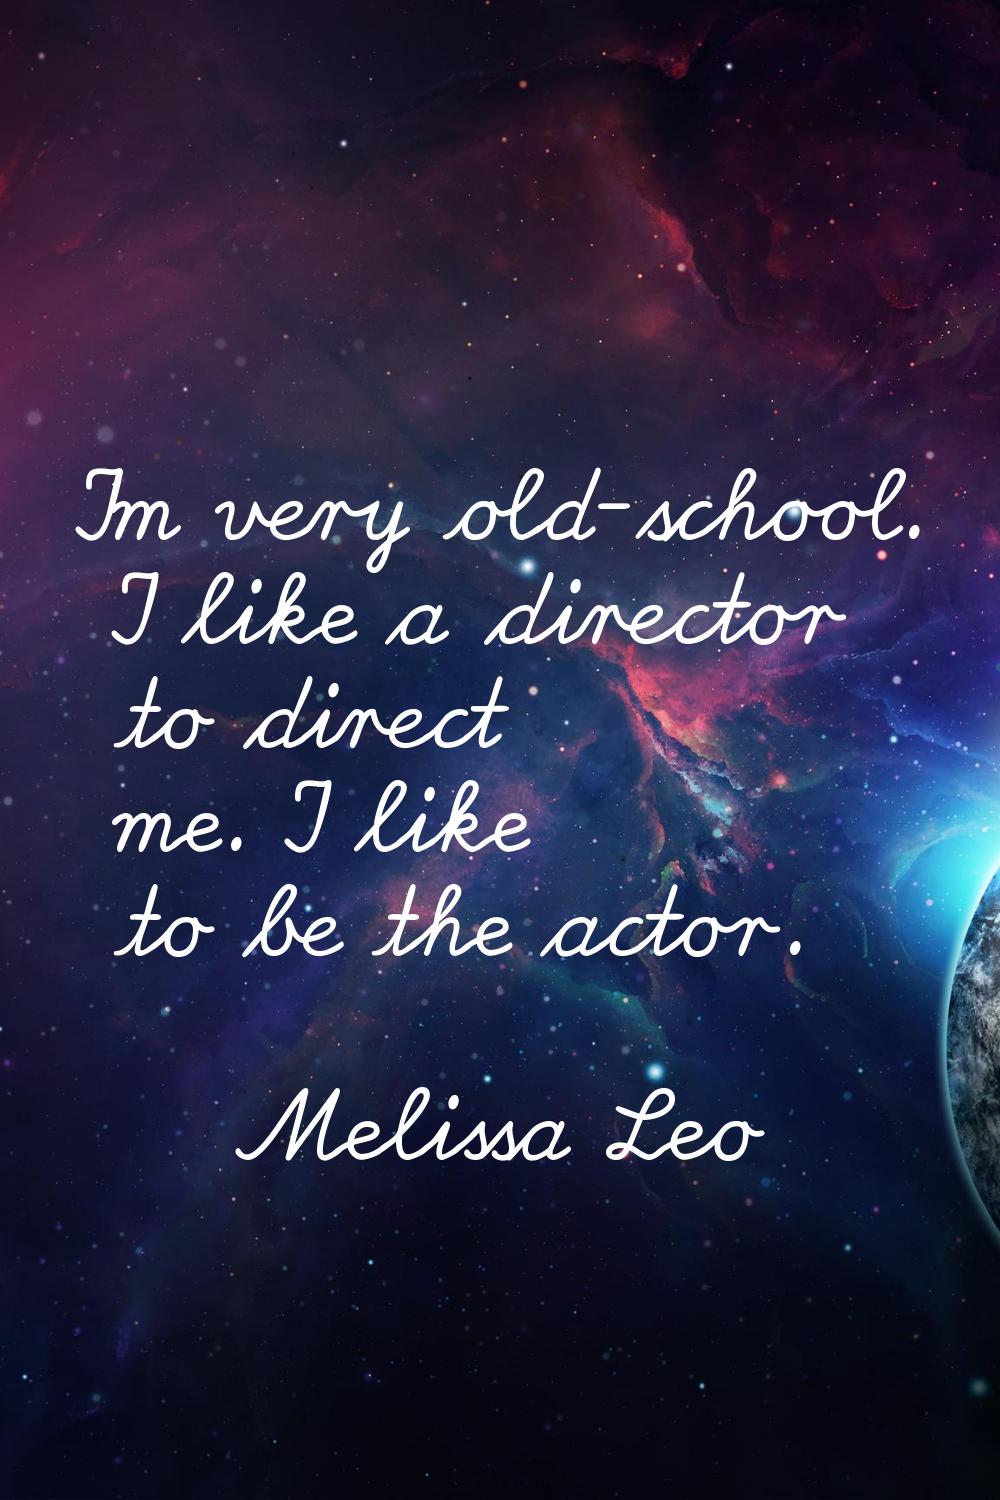 I'm very old-school. I like a director to direct me. I like to be the actor.